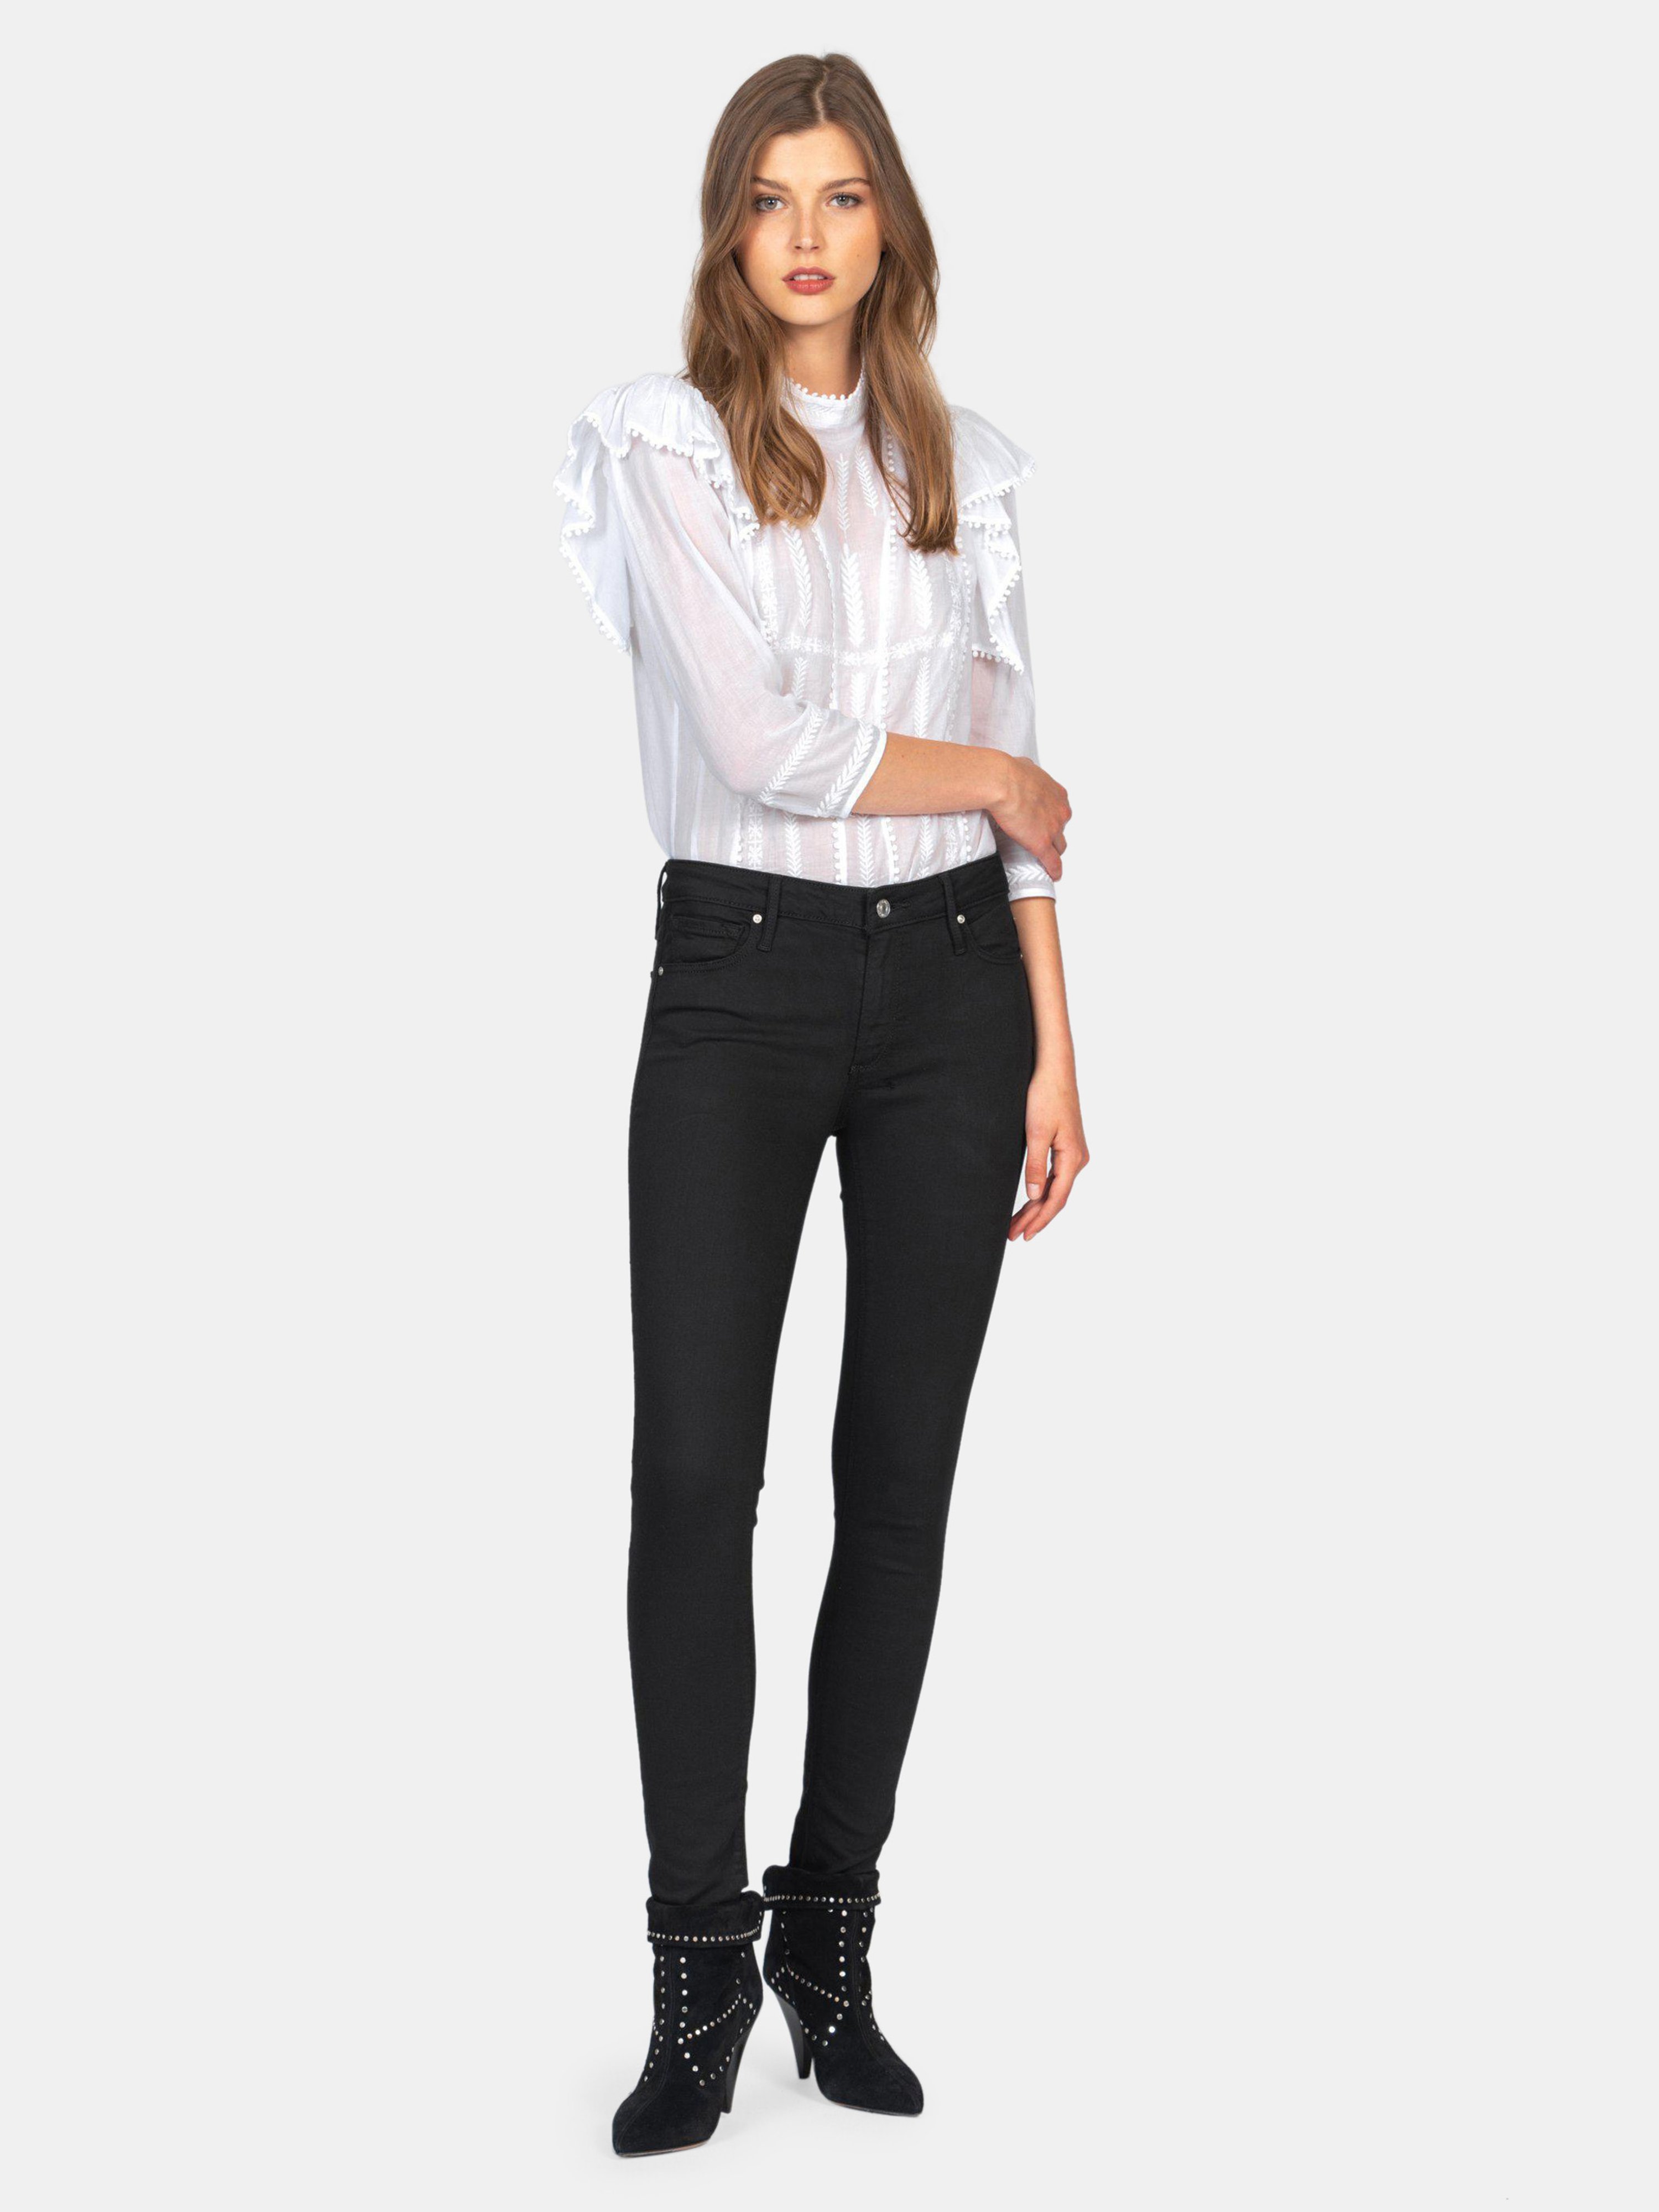 BLACK ORCHID BLACK ORCHID JUDE MID RISE SKINNY